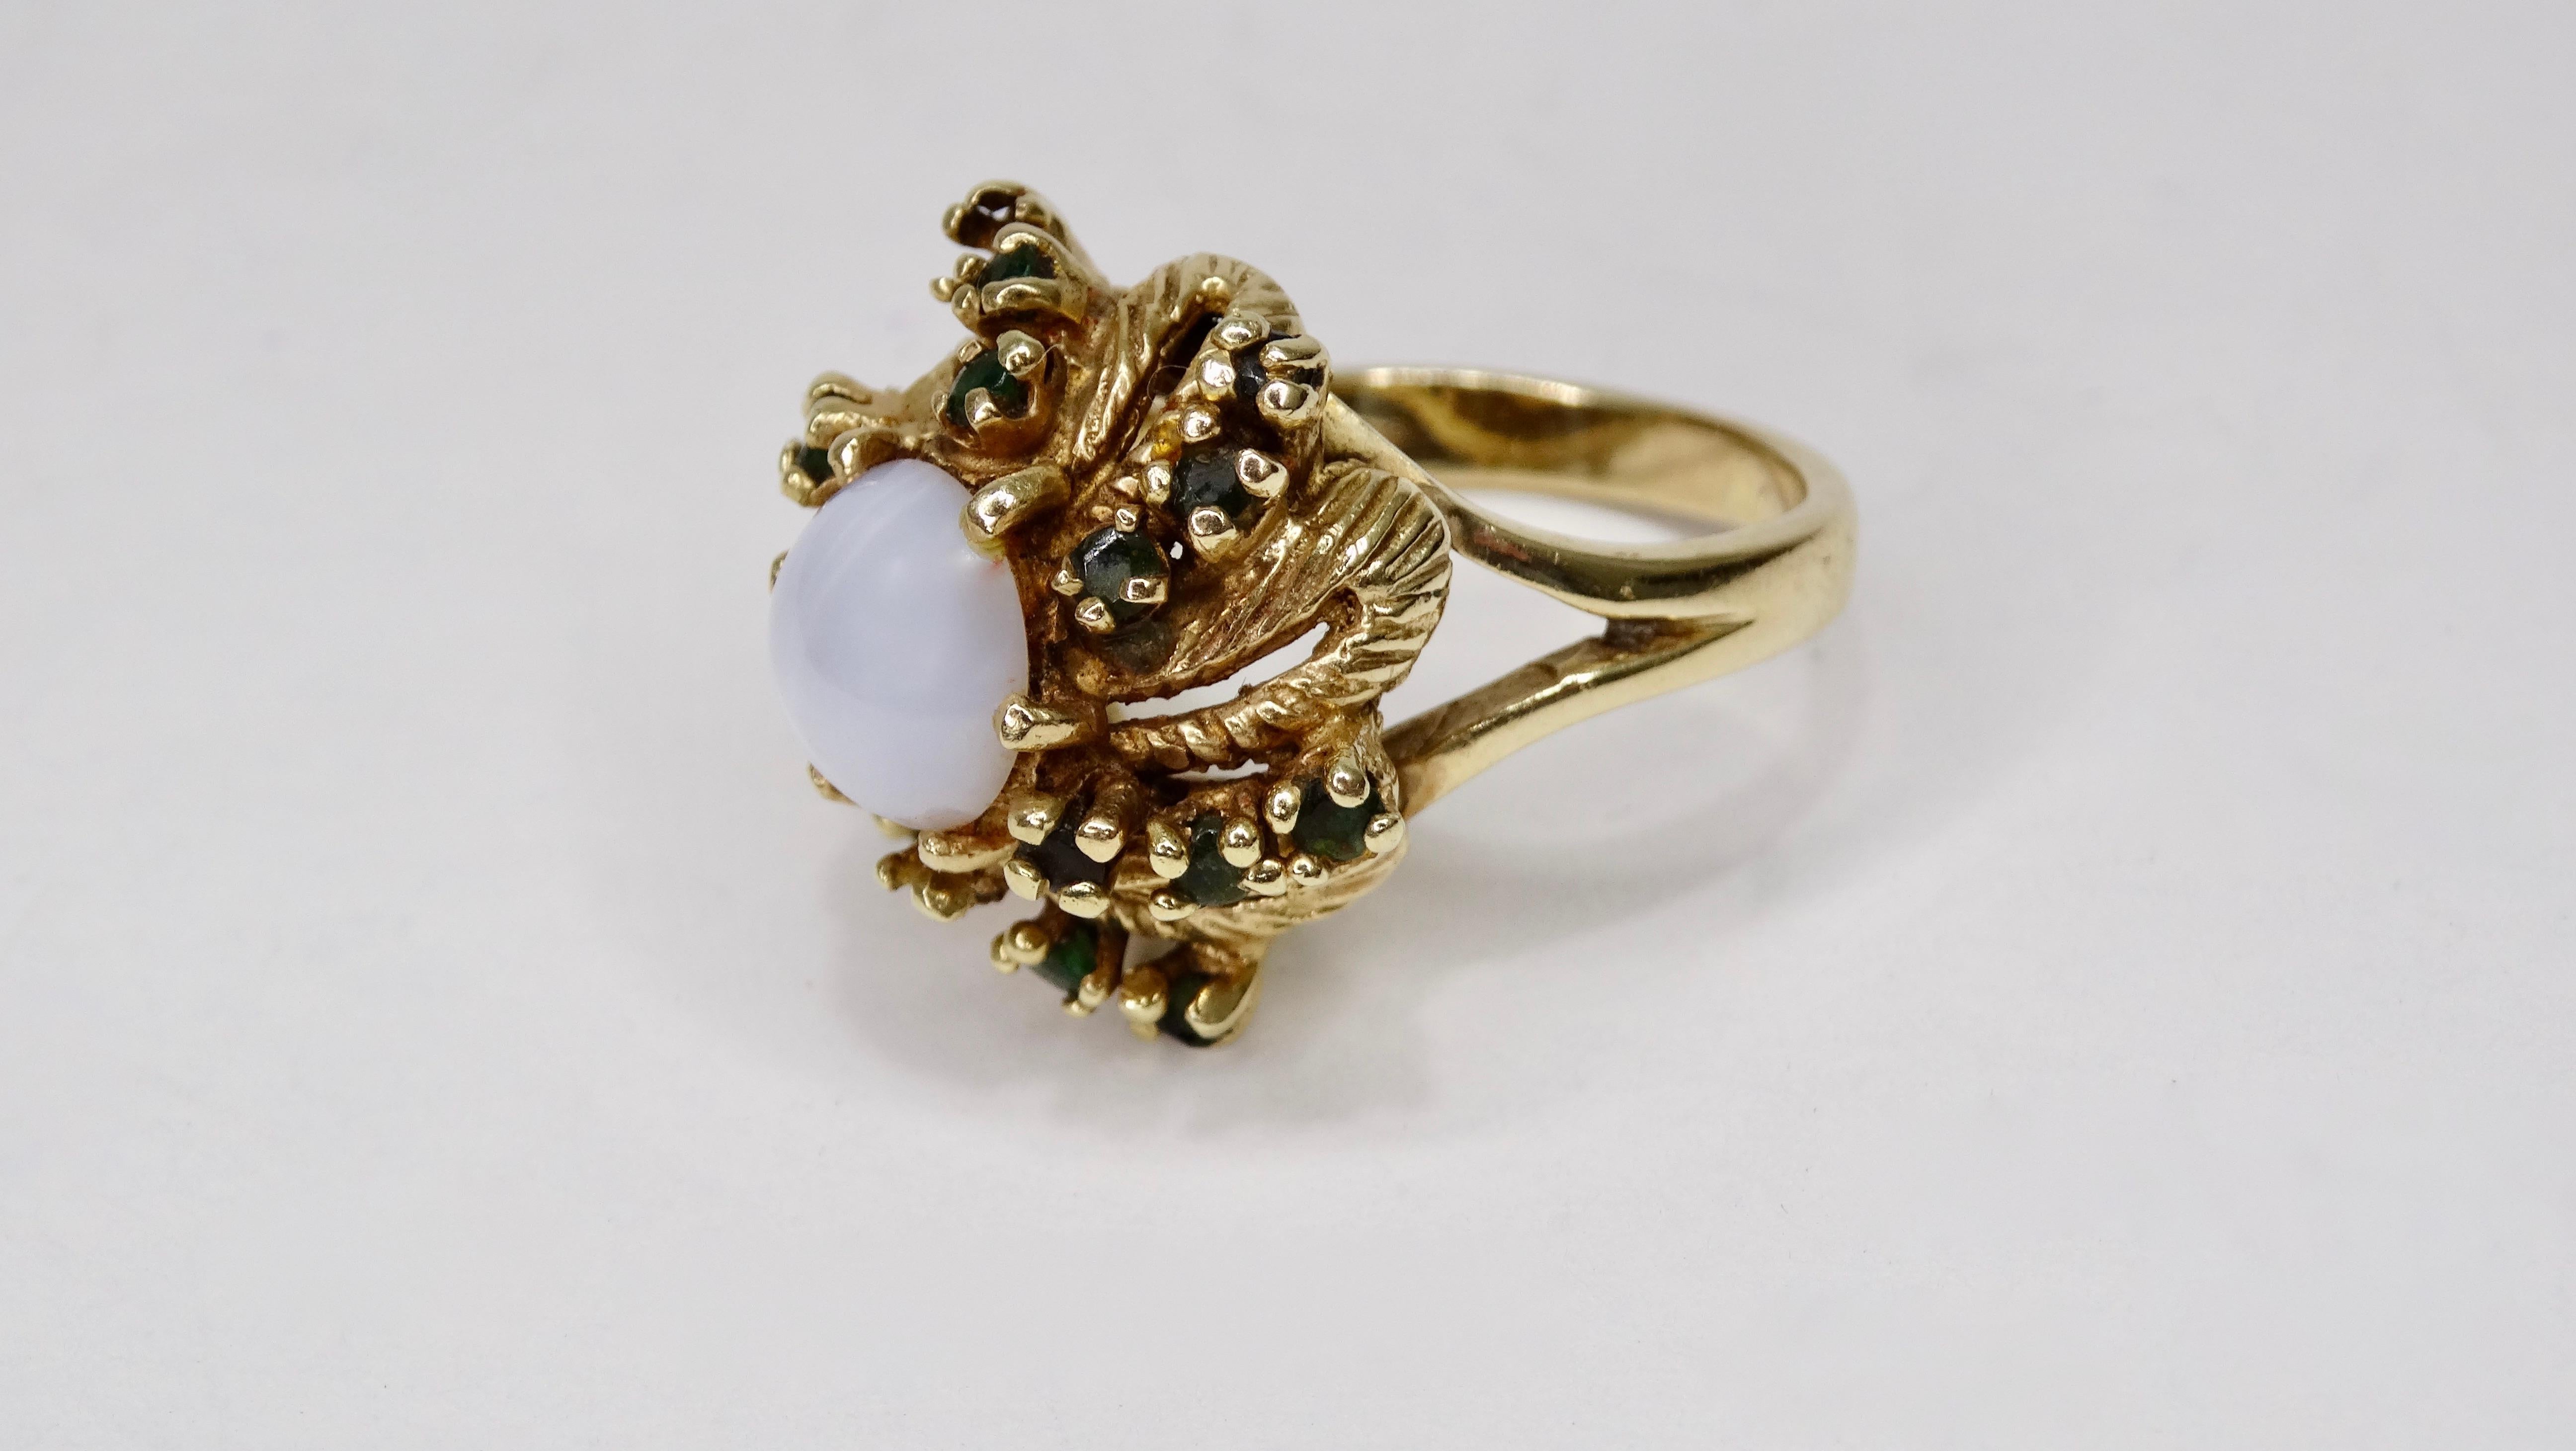 Beautiful mid-20th century 14k Gold ring featuring a Cabochon cut 4 carat Star Sapphire center stone with round cut Emeralds spiraling out. Please note two of the Emeralds are missing from the prong setting. Ring is a size 7 and weighs 10.61g total.